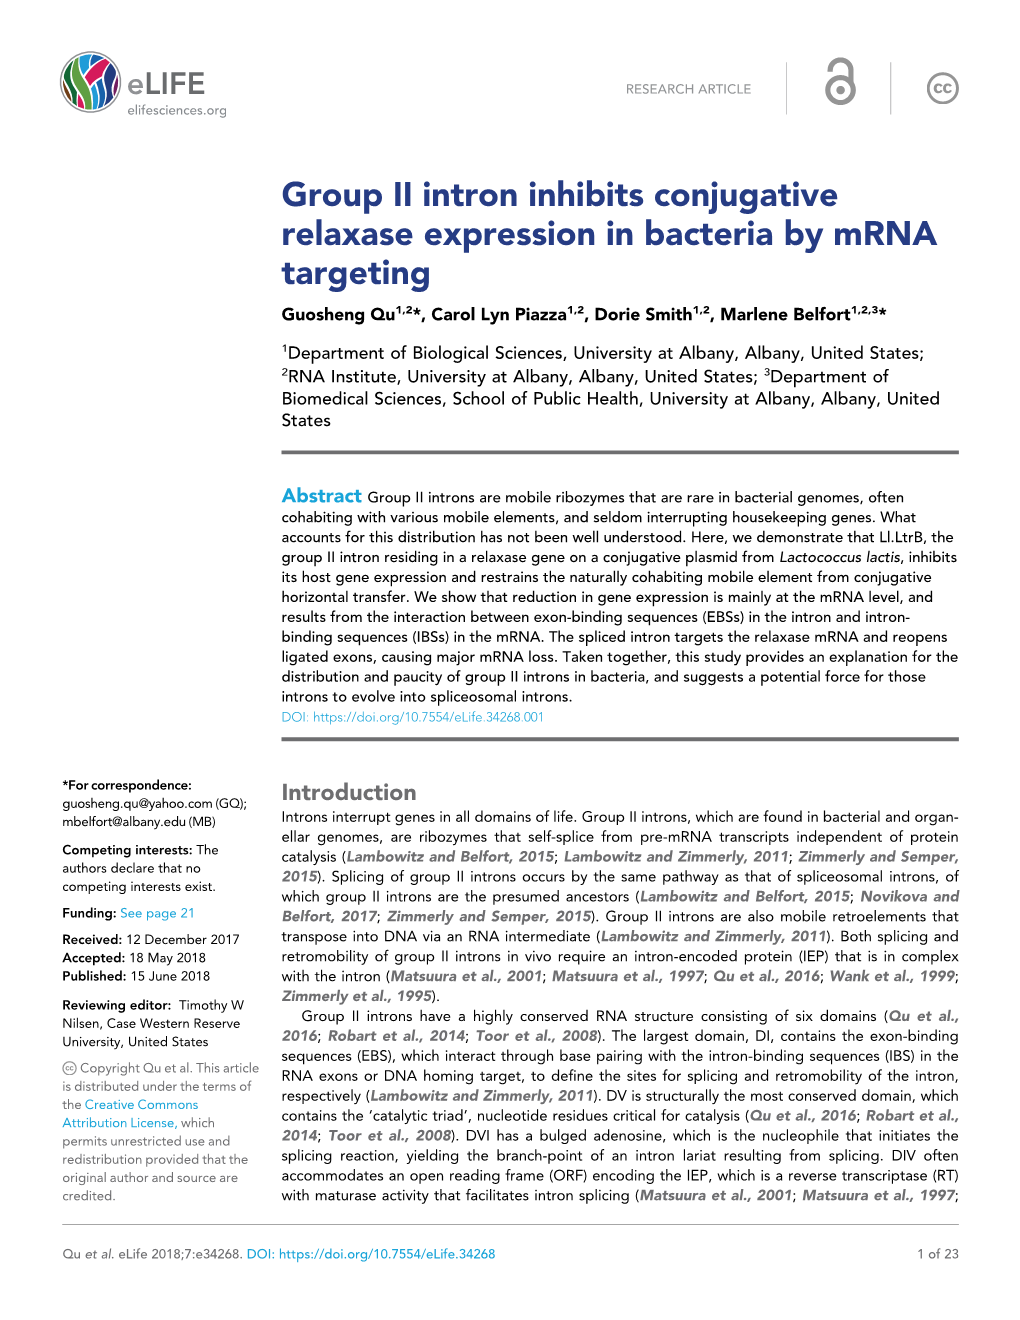 Group II Intron Inhibits Conjugative Relaxase Expression in Bacteria by Mrna Targeting Guosheng Qu1,2*, Carol Lyn Piazza1,2, Dorie Smith1,2, Marlene Belfort1,2,3*